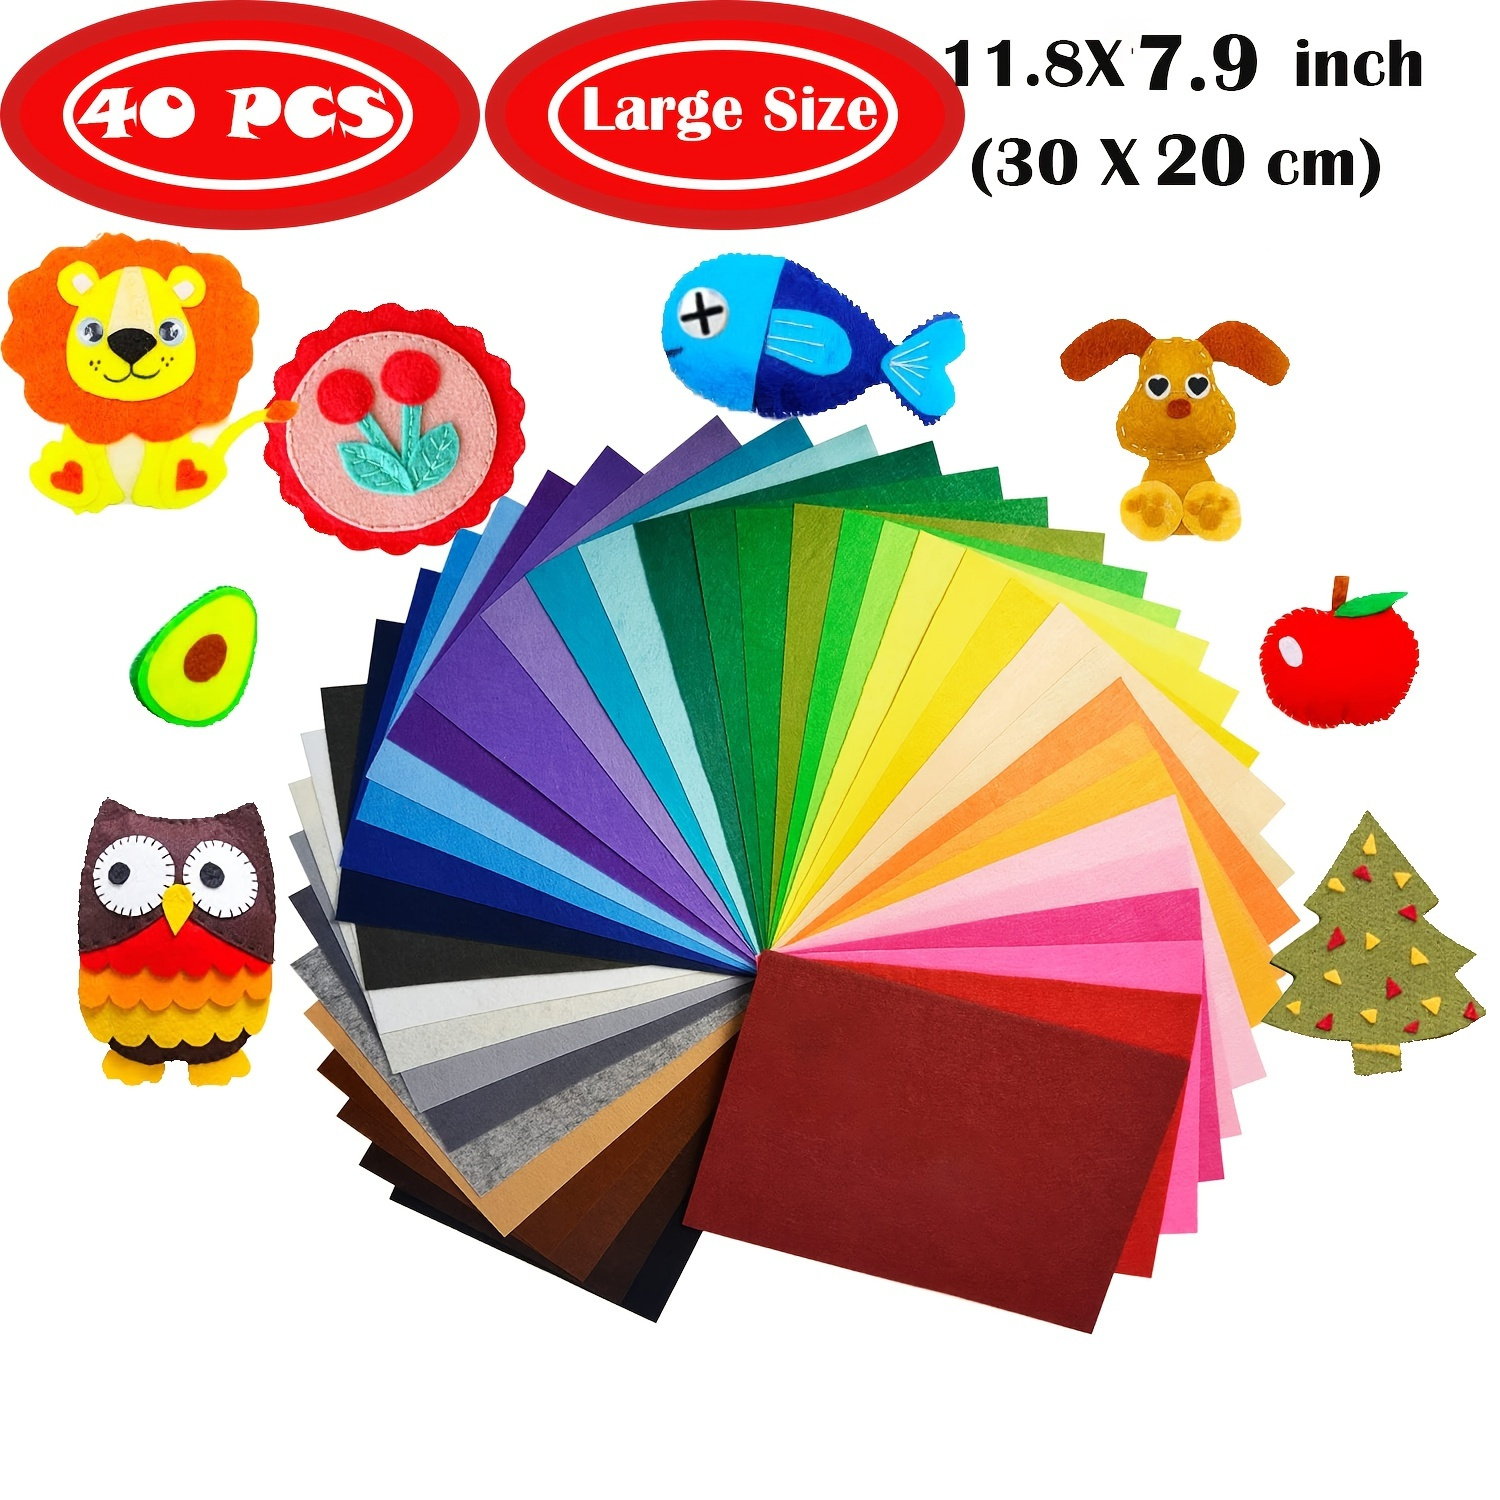 36 Pcs Felt Fabric Sheet 4x4 Assorted Color DIY Sewing Craft Squares  Nonwoven 1mm Thick, Felt Sheets for Kids, Patchwork, School Project 